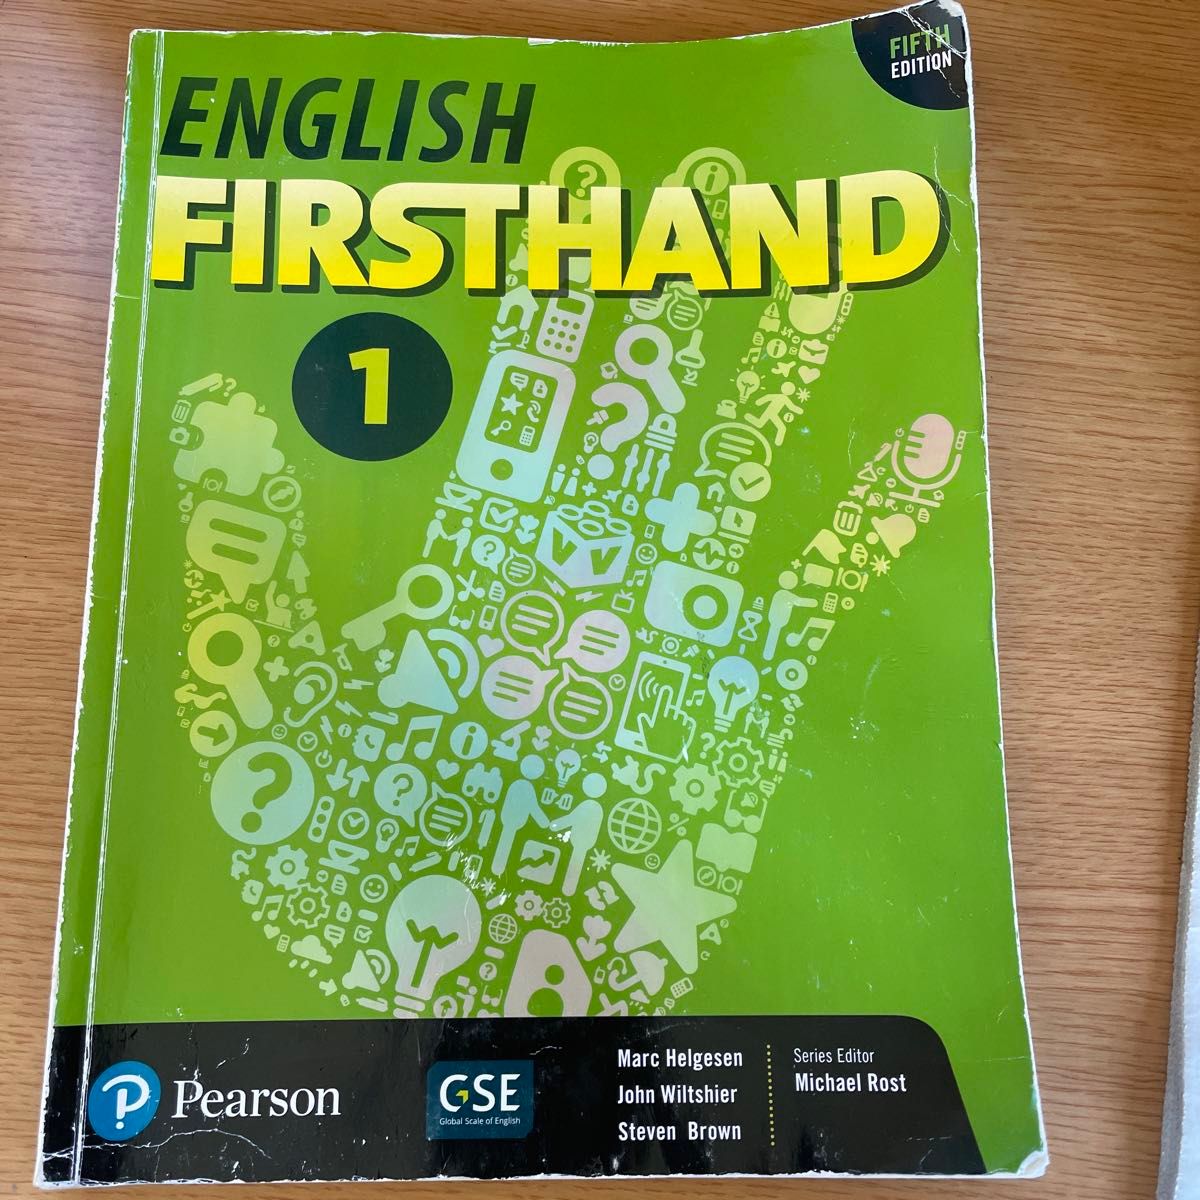 English Firsthand (5th Edition) Student Book (Level 1)